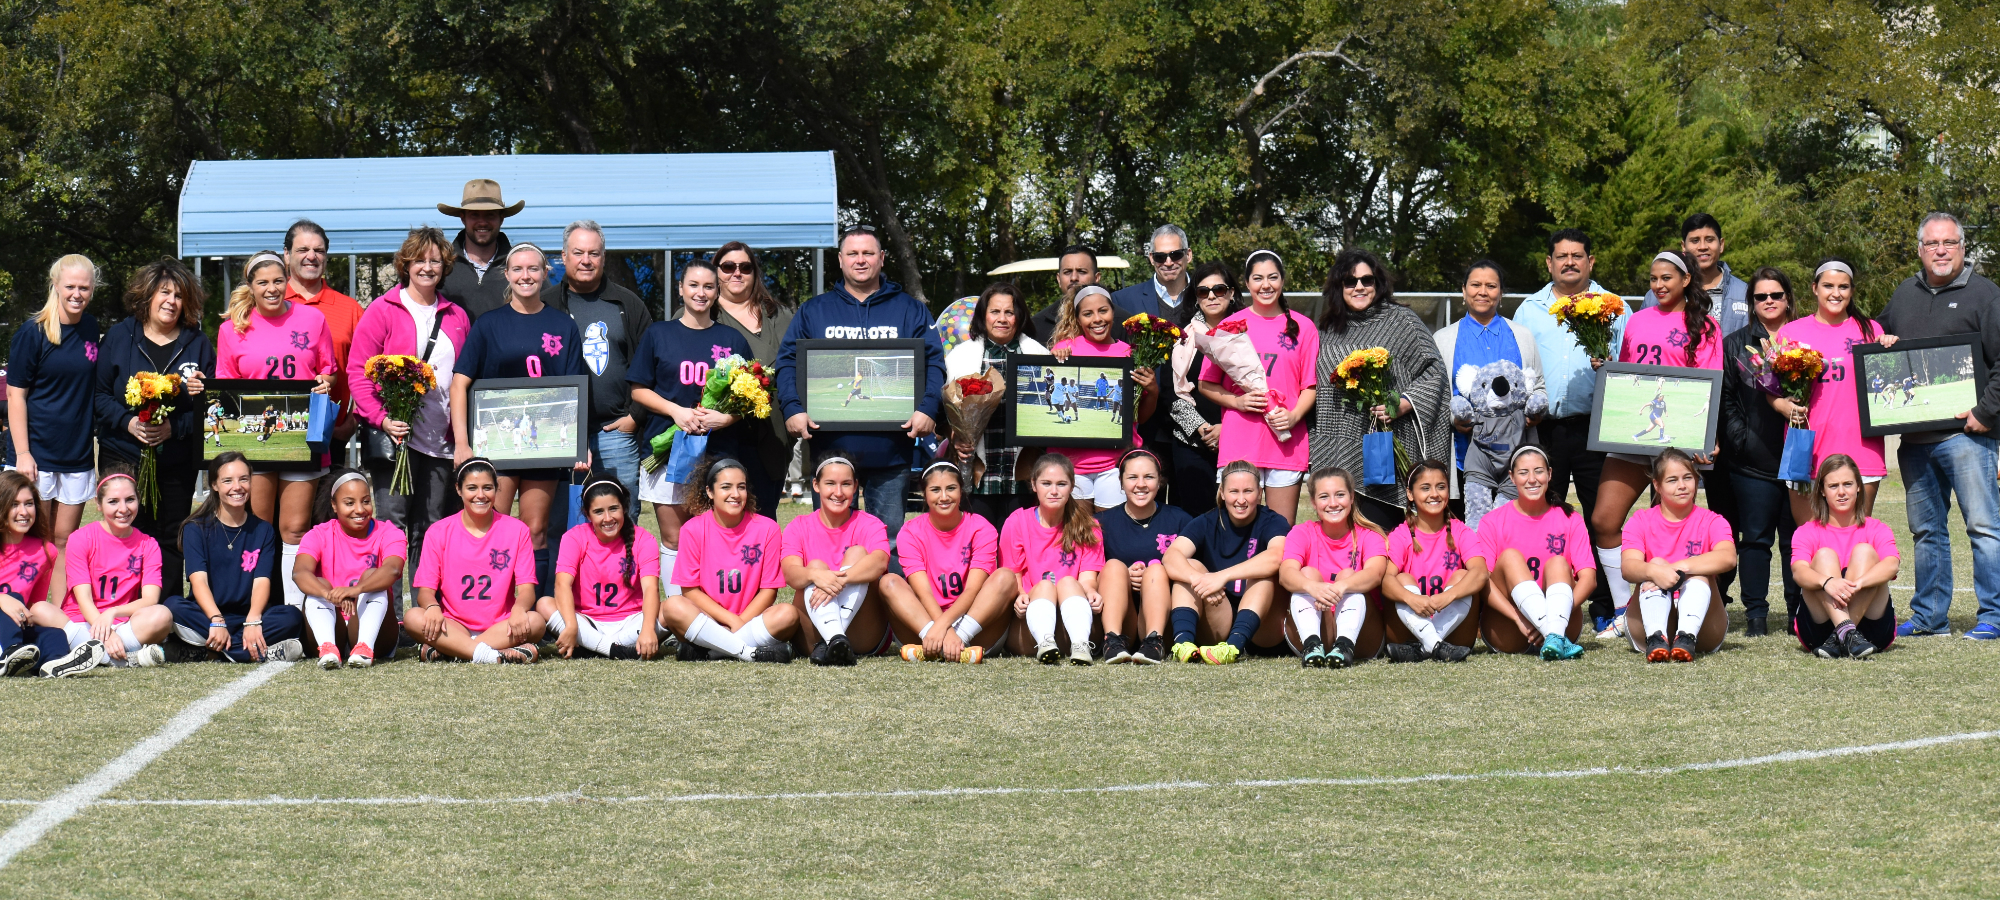 Crusaders hold "Pinkout" match and "Senior Day" on Saturday.